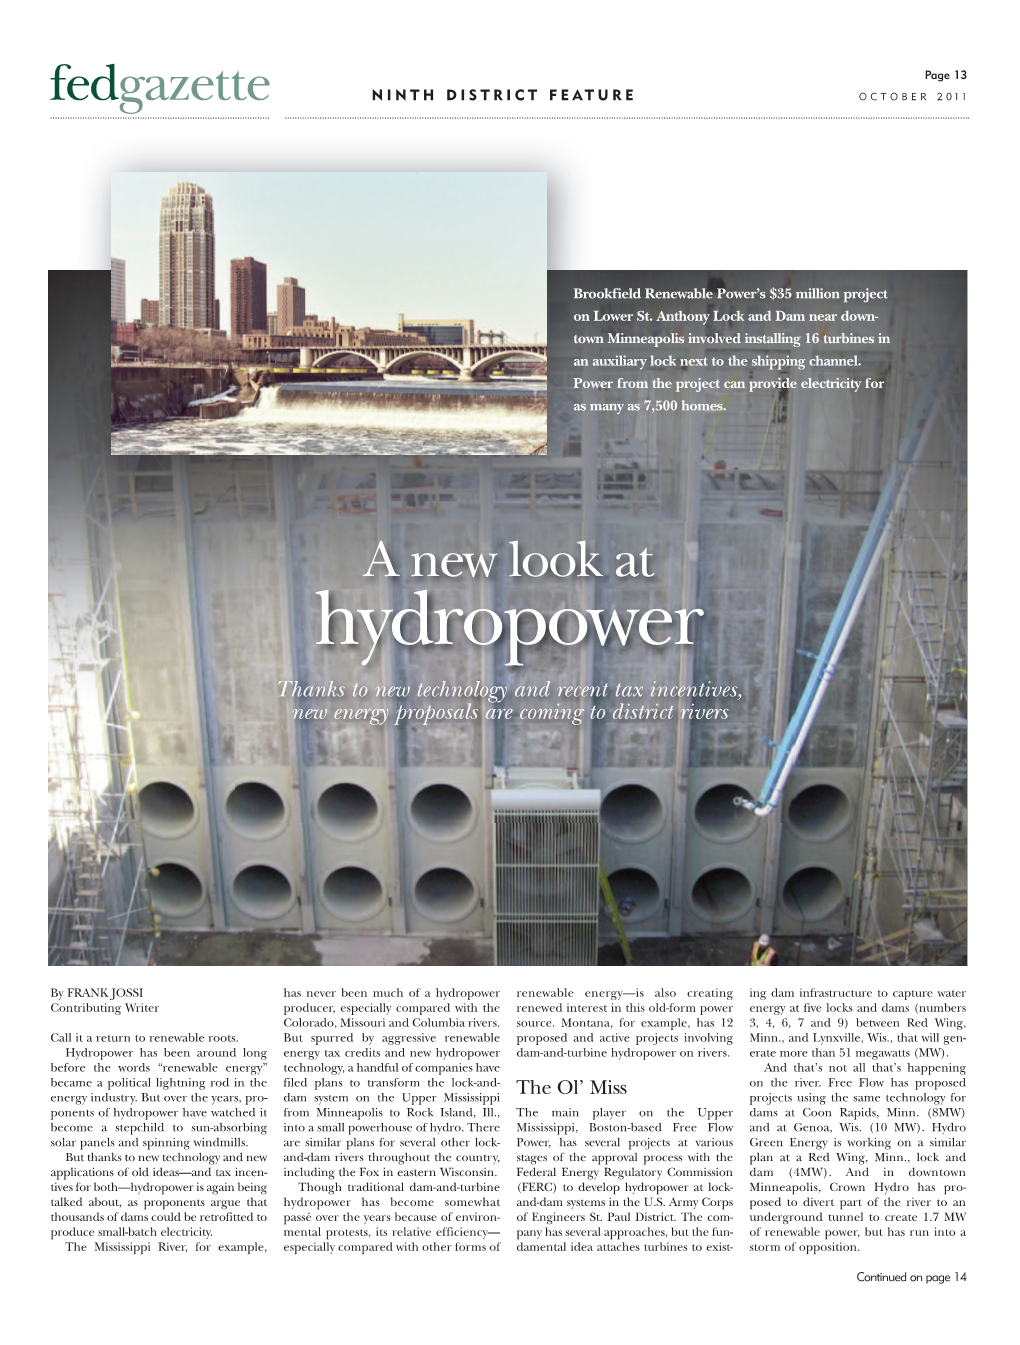 A New Look at Hydropower